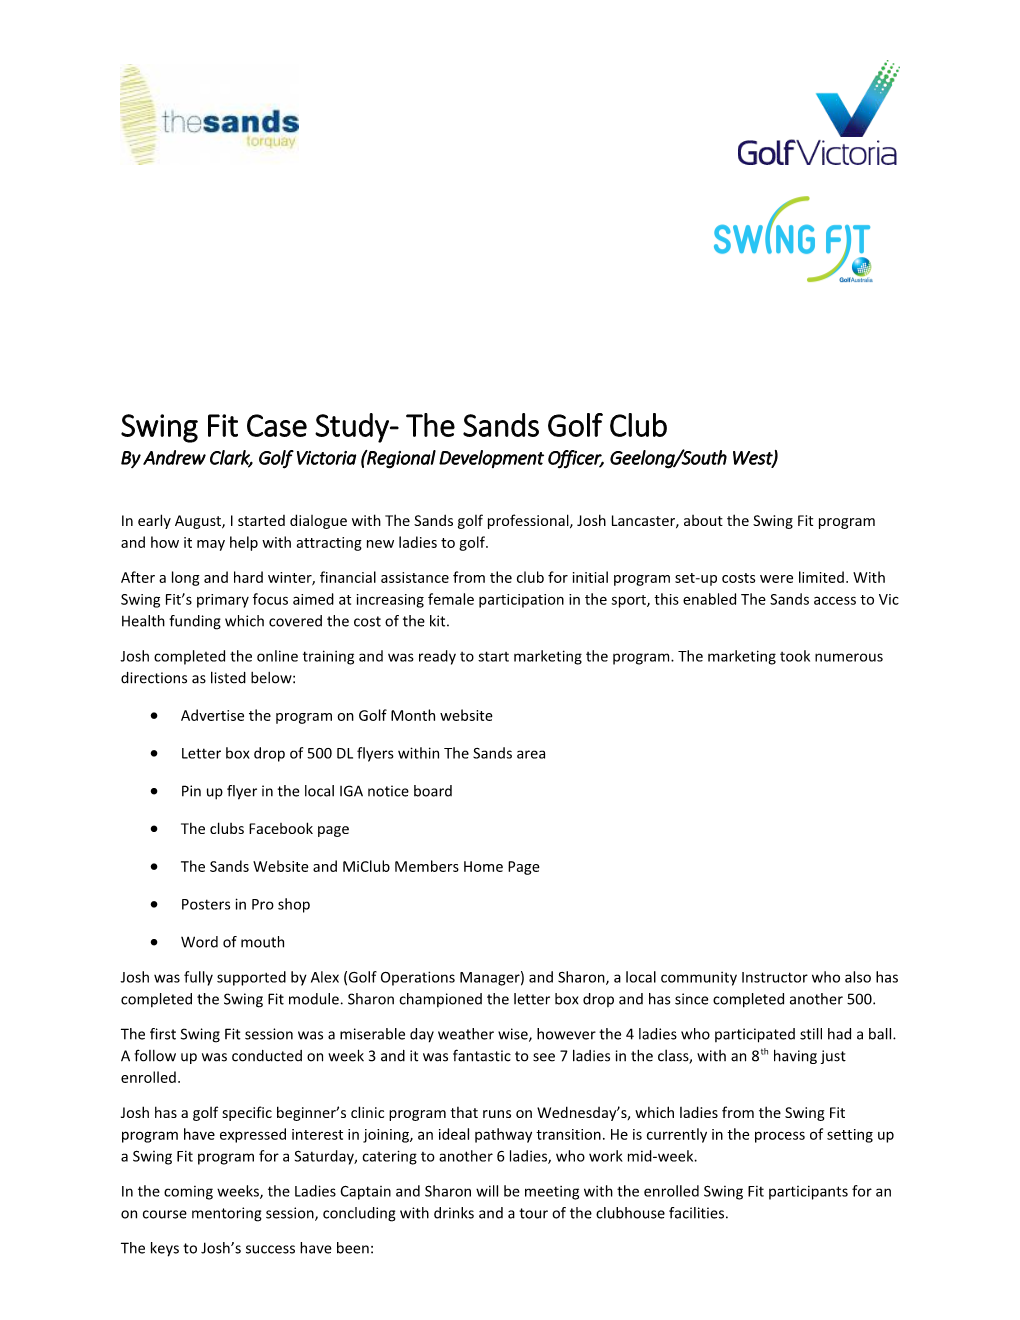 Swing Fit Case Study- the Sands Golf Club